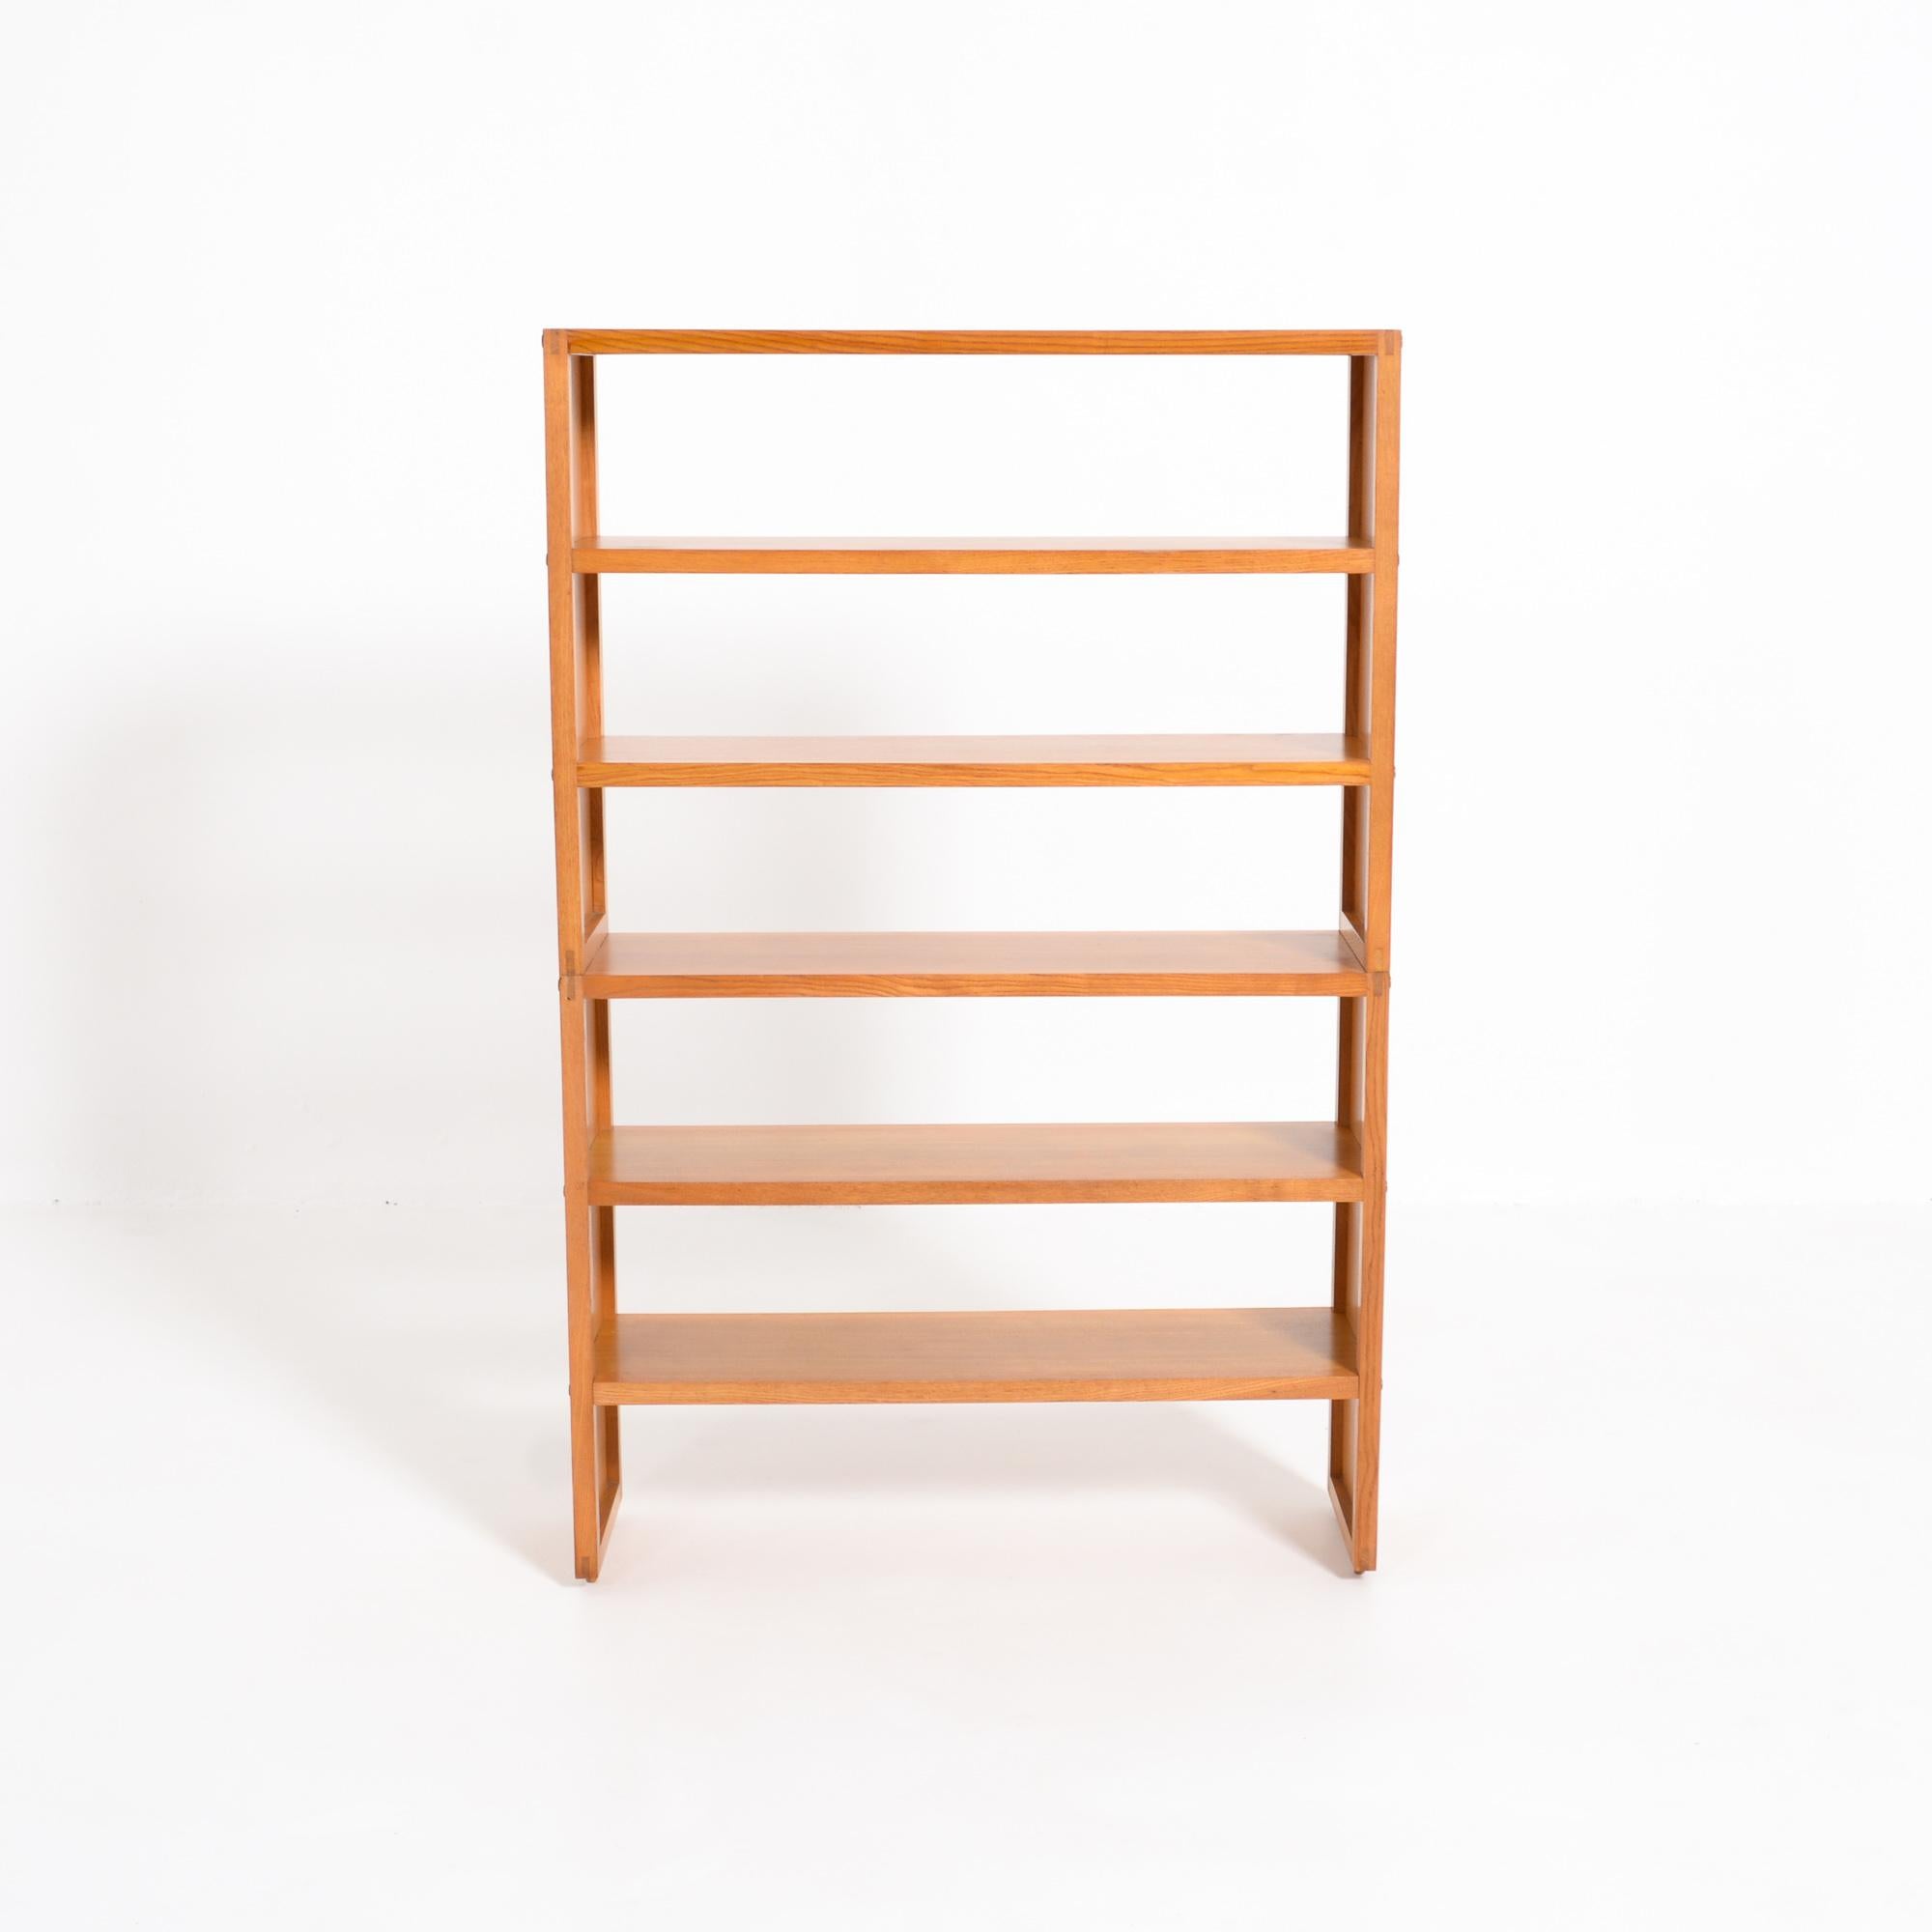 This bookshelf and room divider was designed by Pieter De Bruyne in 1957.
It was designed for a bedroom. Characteristic of De Bruyne’s work is the pure design with an eye for detail.
The bookshelf is made of ash wood and exists of two parts that